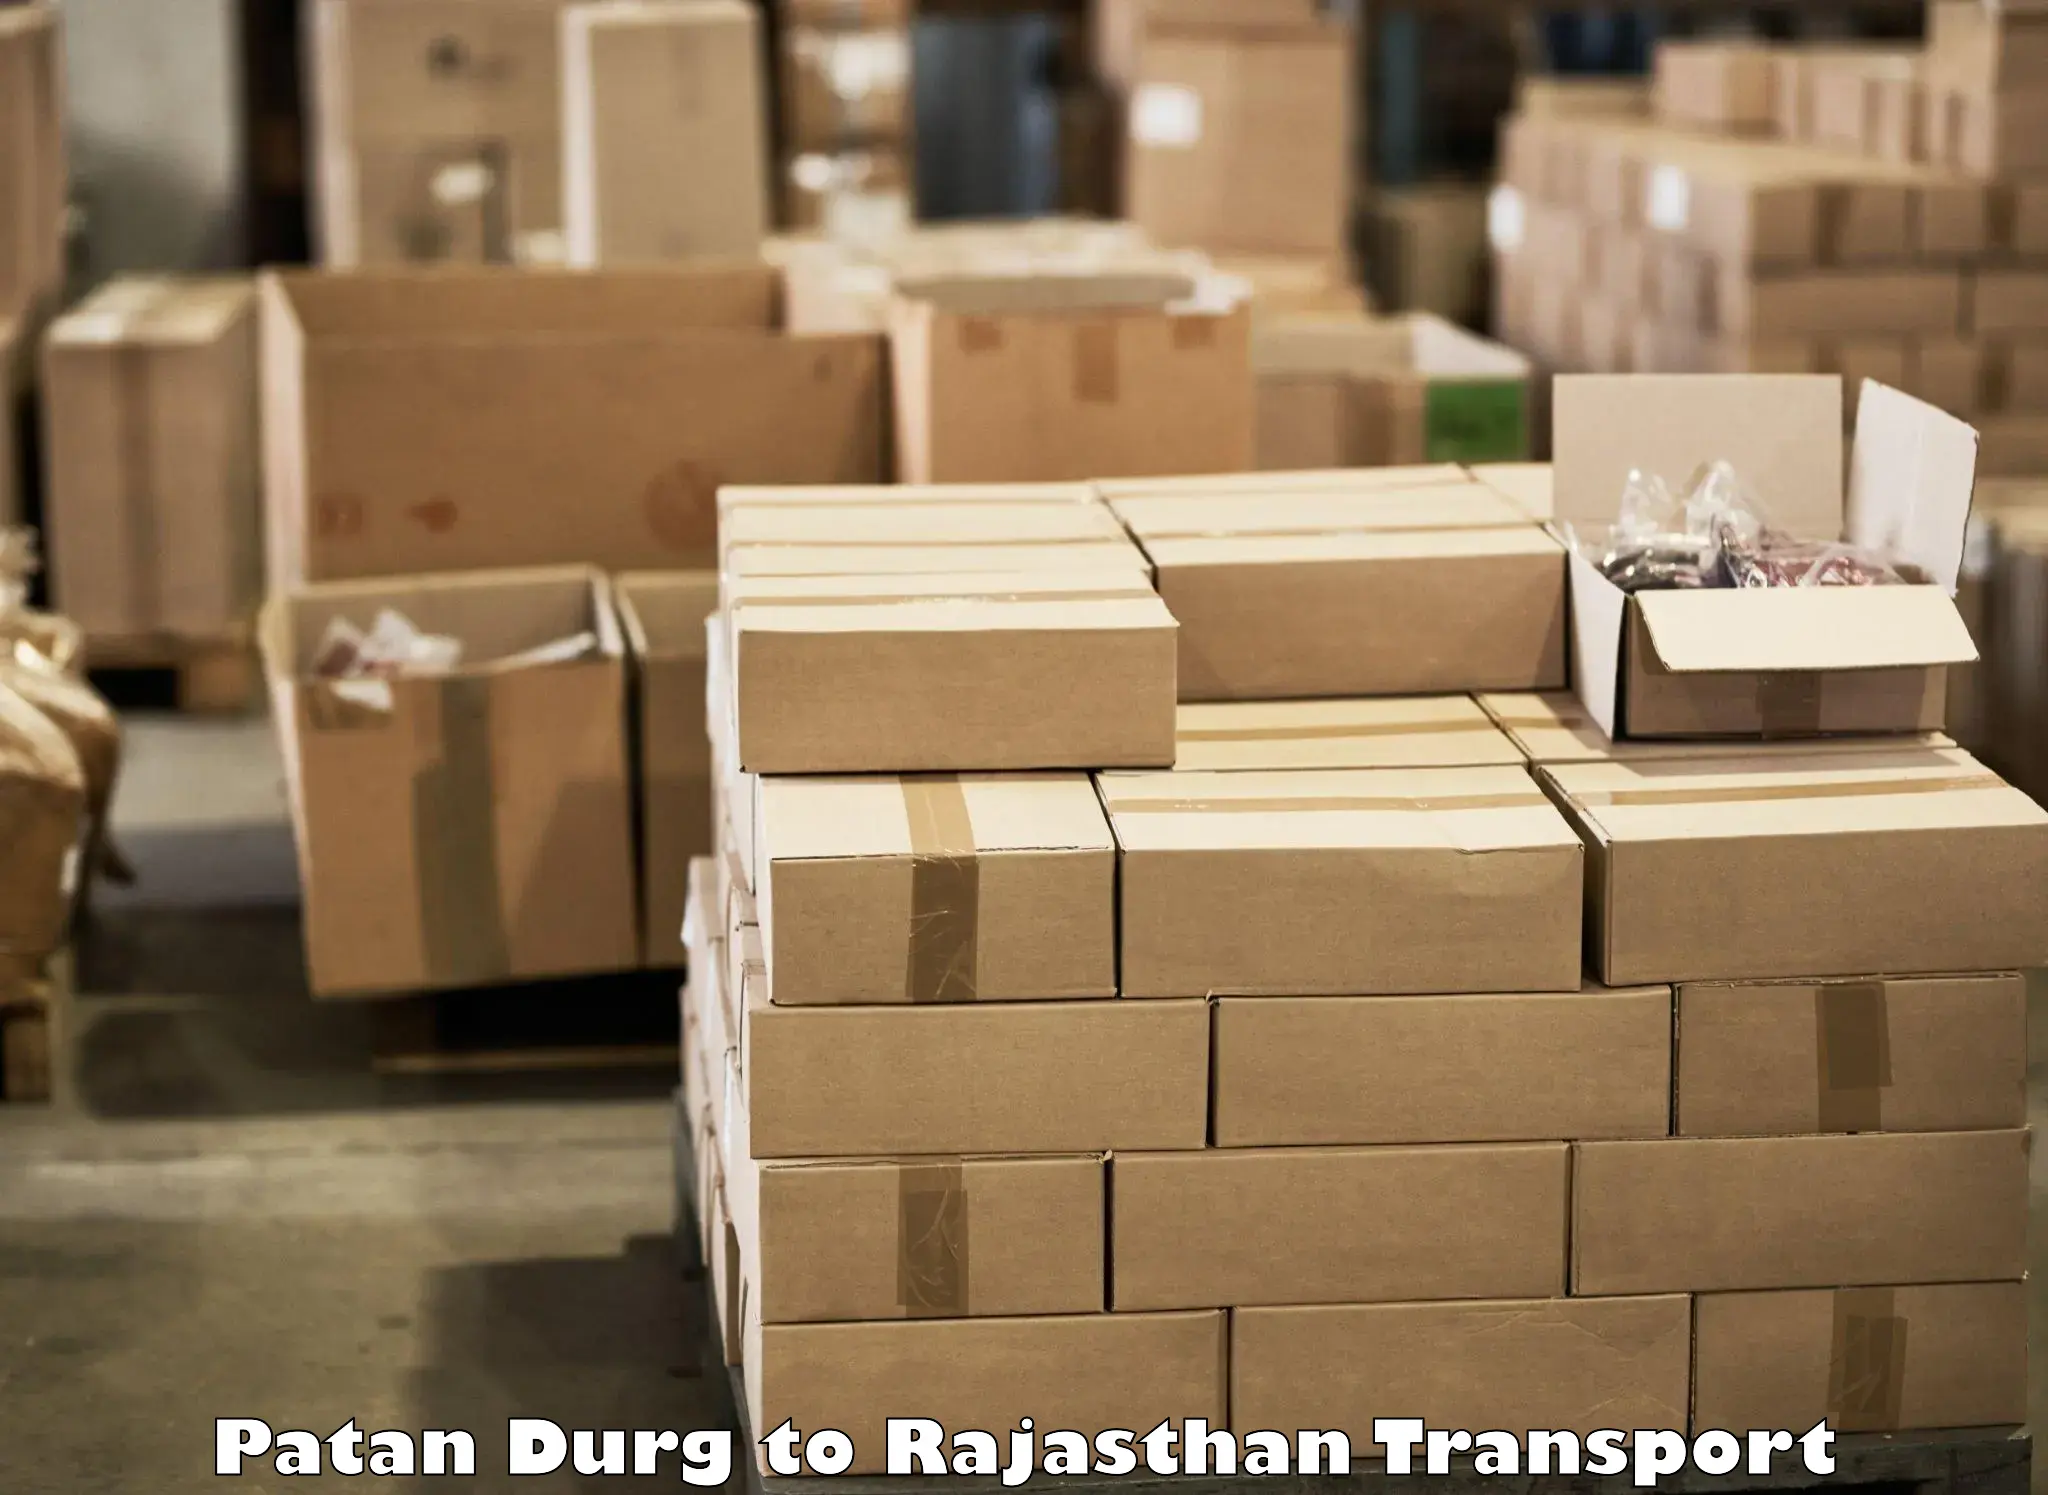 Air freight transport services Patan Durg to Deenwa